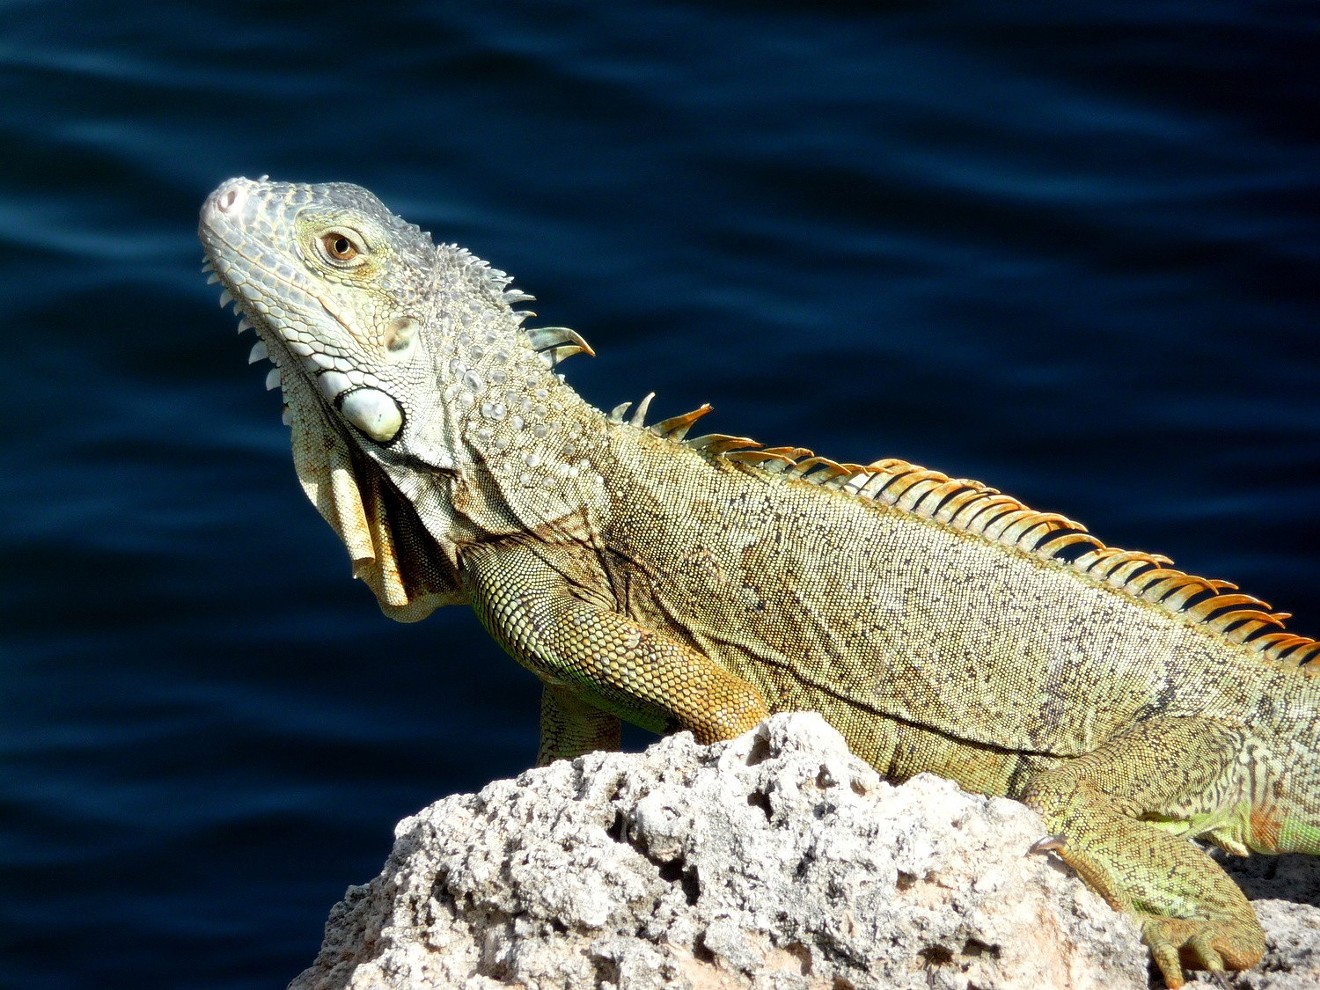 The Florida Fish and Wildlife Conservation Commission has called for open season on invasive iguanas.